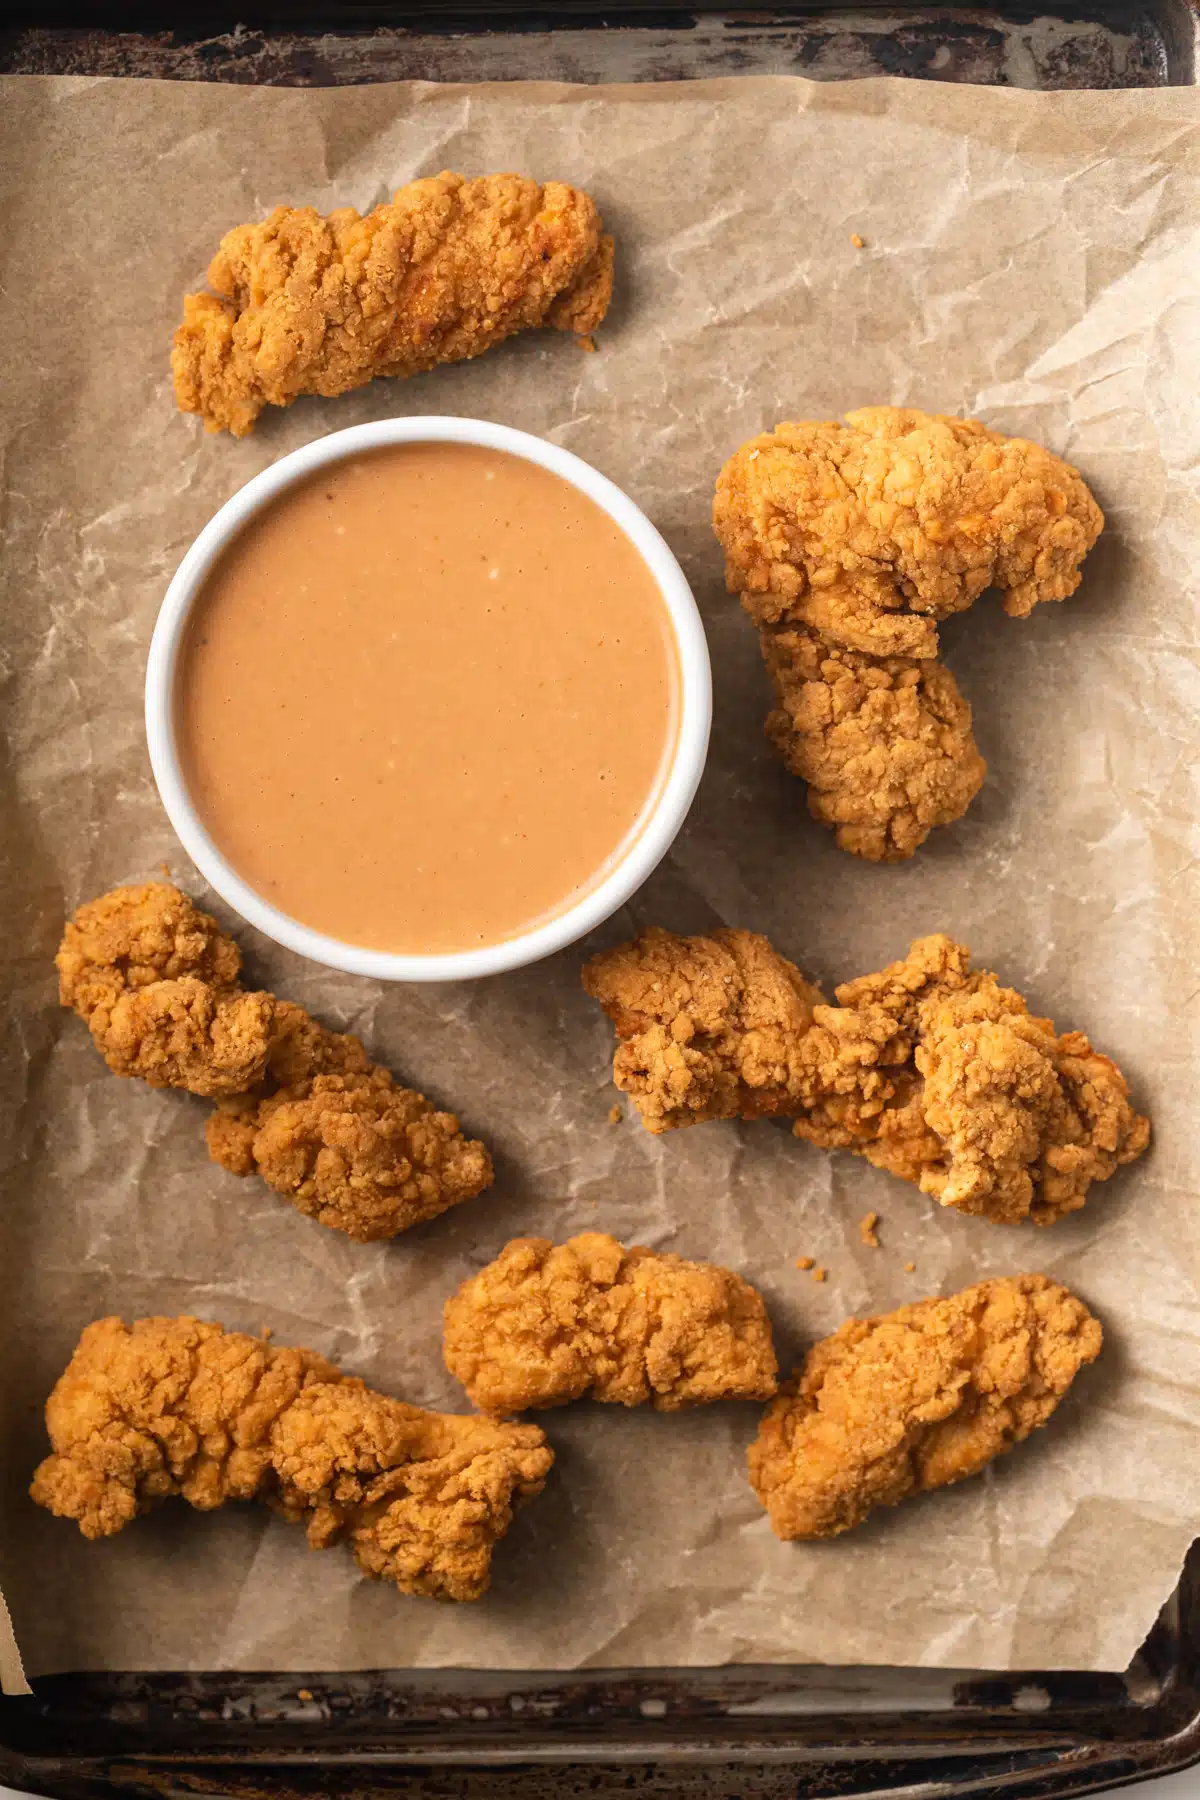 Chicken nugget dipping sauce in white bowl with chicken nuggets scattered around.